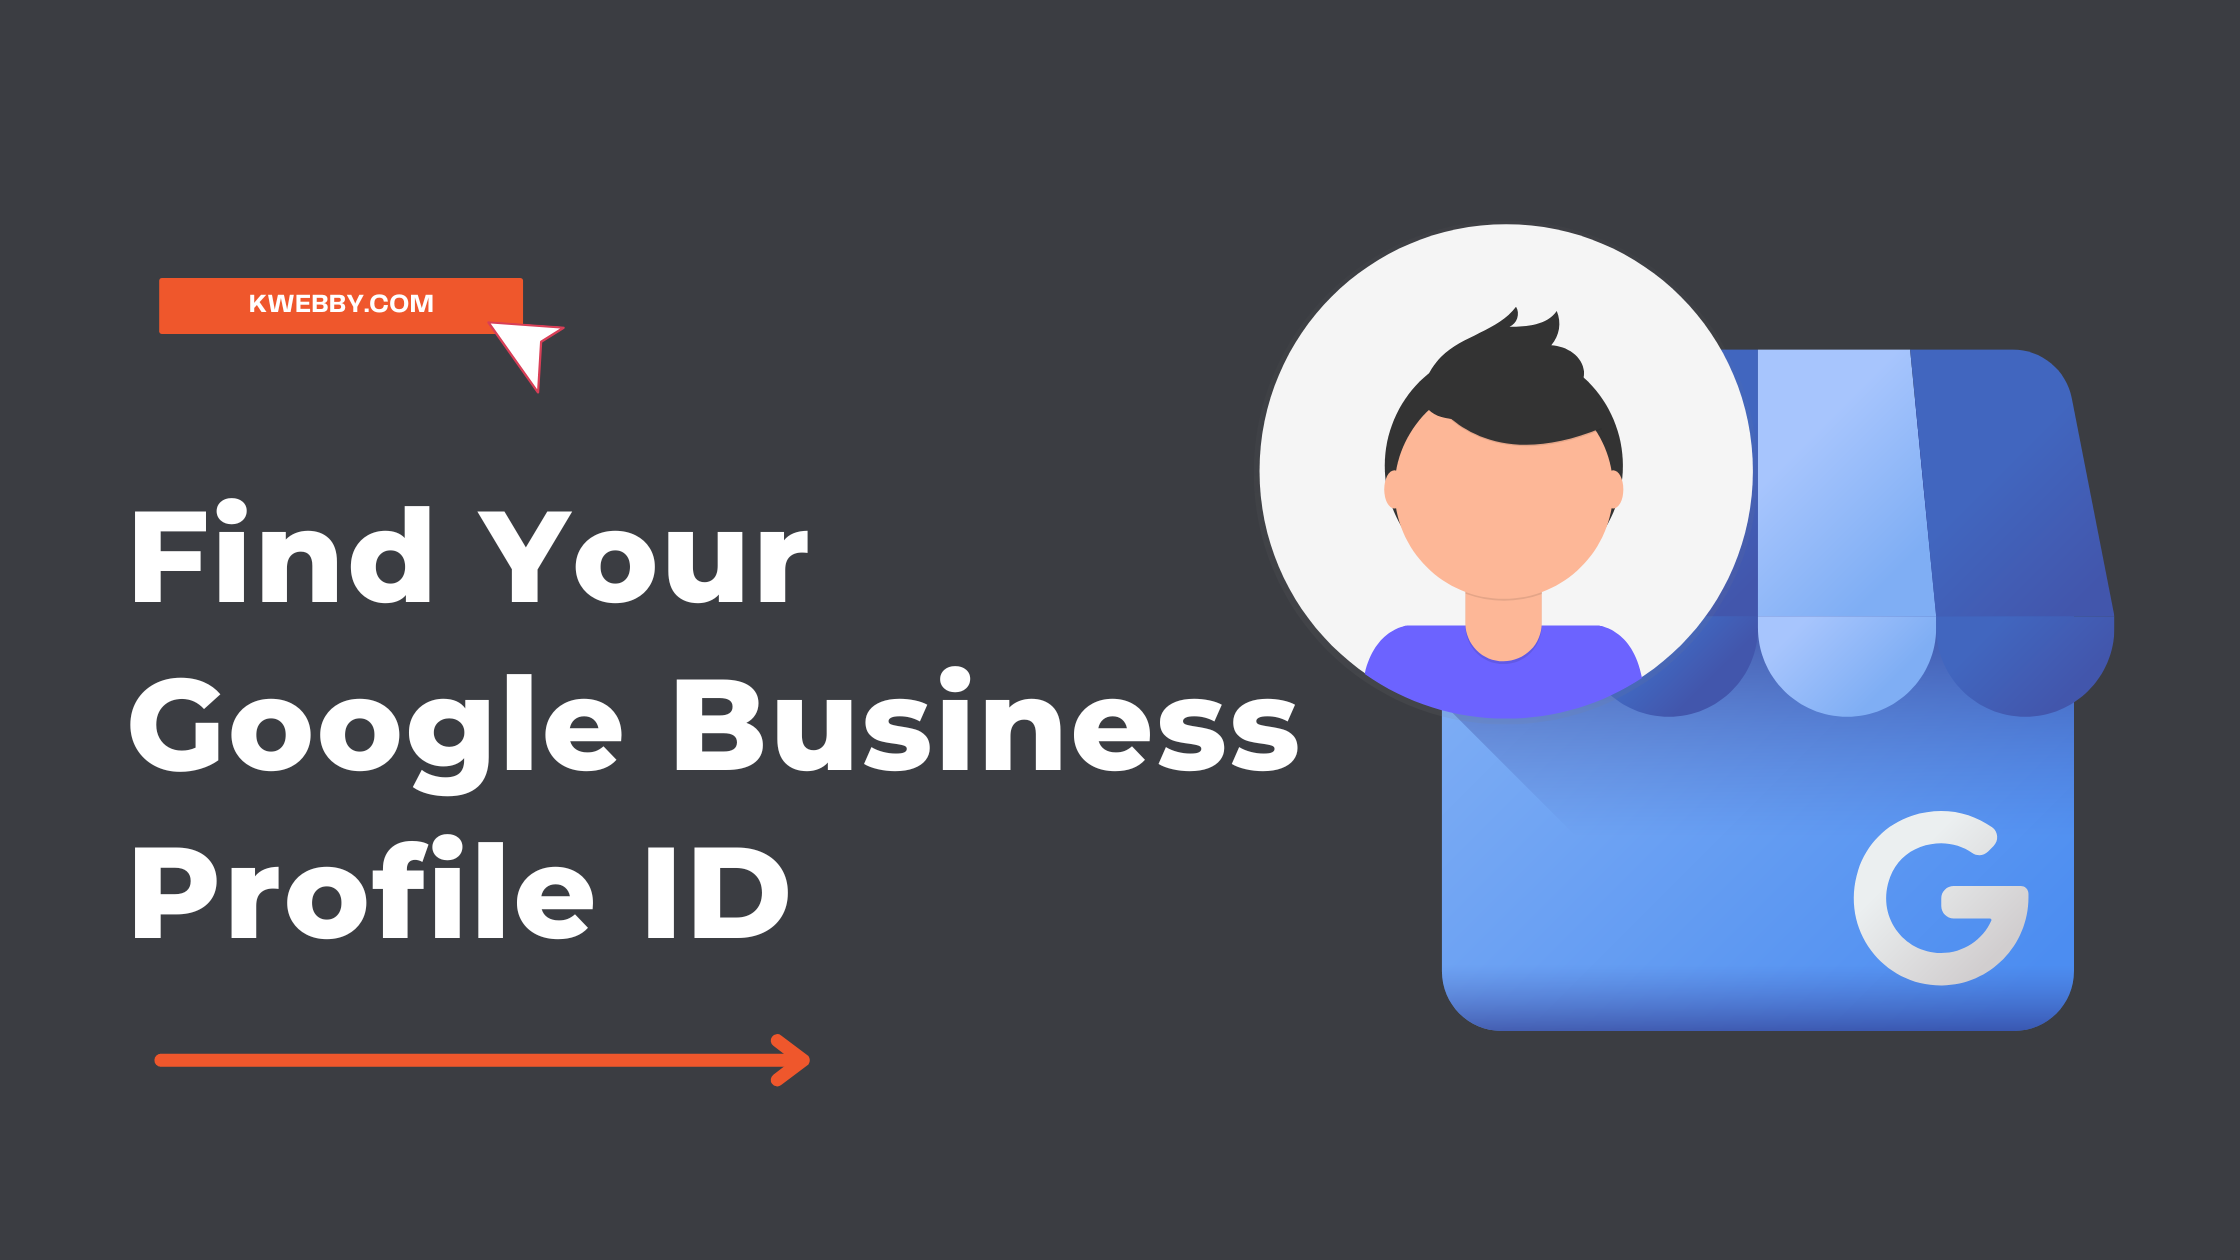 How to Find Your Google Business Profile ID in 2 Easy Steps